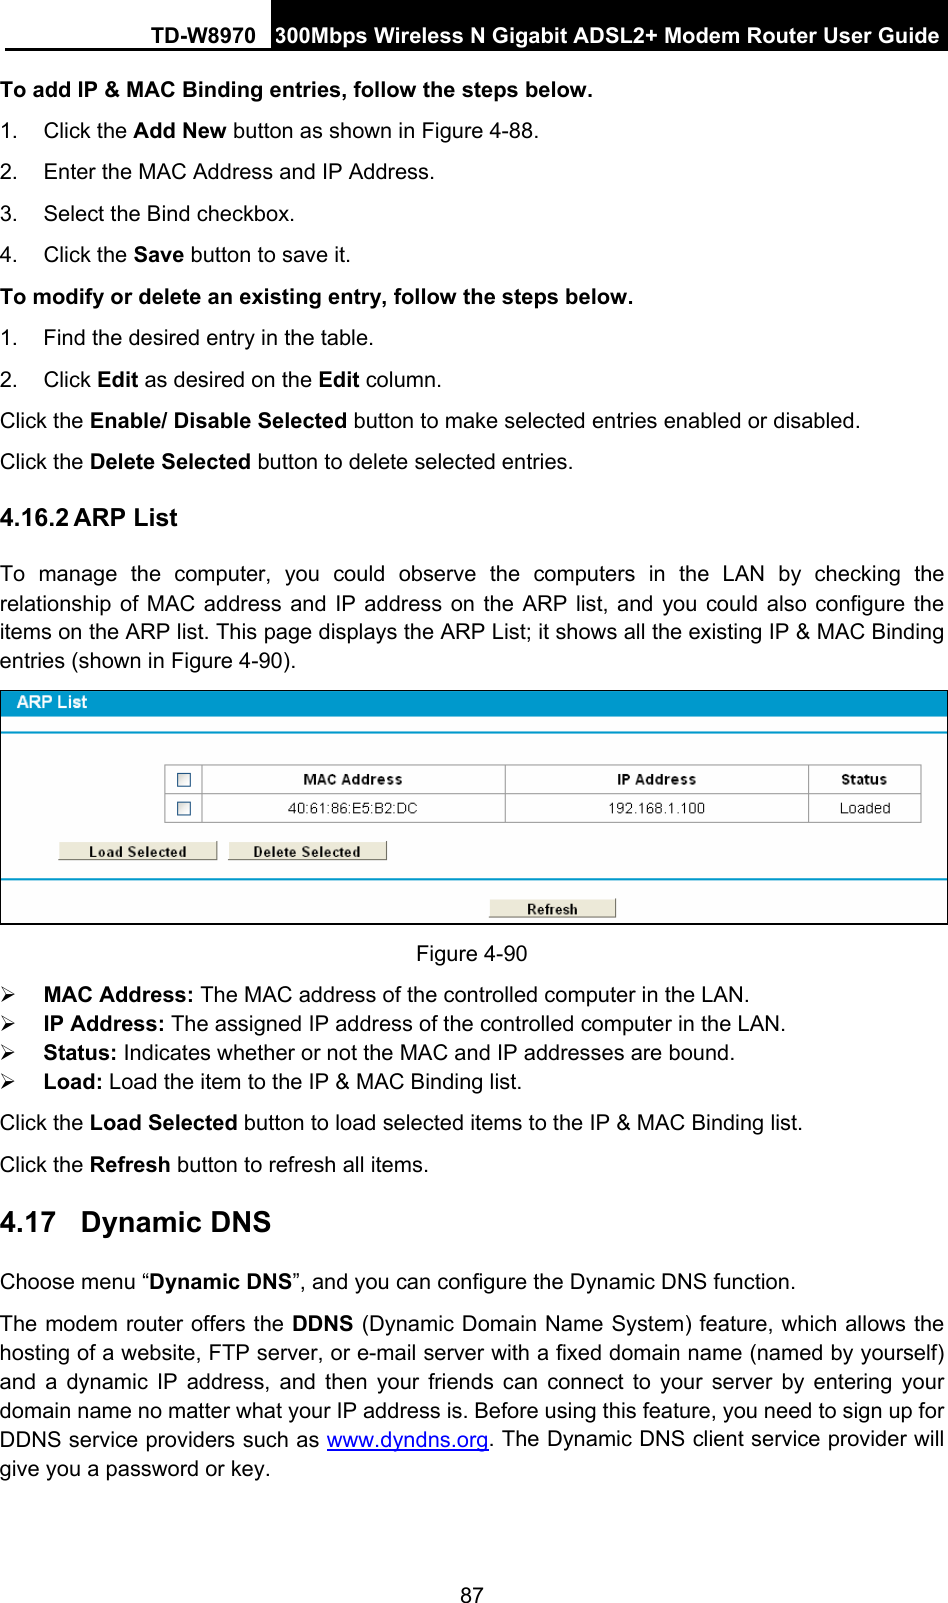 TD-W8970 300Mbps Wireless N Gigabit ADSL2+ Modem Router User Guide 87 To add IP &amp; MAC Binding entries, follow the steps below. 1. Click the Add New button as shown in Figure 4-88.  2.  Enter the MAC Address and IP Address. 3.  Select the Bind checkbox.   4. Click the Save button to save it. To modify or delete an existing entry, follow the steps below. 1.  Find the desired entry in the table.   2. Click Edit as desired on the Edit column.   Click the Enable/ Disable Selected button to make selected entries enabled or disabled. Click the Delete Selected button to delete selected entries. 4.16.2 ARP List To manage the computer, you could observe the computers in the LAN by checking the relationship of MAC address and IP address on the ARP list, and you could also configure the items on the ARP list. This page displays the ARP List; it shows all the existing IP &amp; MAC Binding entries (shown in Figure 4-90).  Figure 4-90 ¾ MAC Address: The MAC address of the controlled computer in the LAN.   ¾ IP Address: The assigned IP address of the controlled computer in the LAN.   ¾ Status: Indicates whether or not the MAC and IP addresses are bound. ¾ Load: Load the item to the IP &amp; MAC Binding list.   Click the Load Selected button to load selected items to the IP &amp; MAC Binding list. Click the Refresh button to refresh all items. 4.17  Dynamic DNS Choose menu “Dynamic DNS”, and you can configure the Dynamic DNS function.   The modem router offers the DDNS (Dynamic Domain Name System) feature, which allows the hosting of a website, FTP server, or e-mail server with a fixed domain name (named by yourself) and a dynamic IP address, and then your friends can connect to your server by entering your domain name no matter what your IP address is. Before using this feature, you need to sign up for DDNS service providers such as www.dyndns.org. The Dynamic DNS client service provider will give you a password or key. 